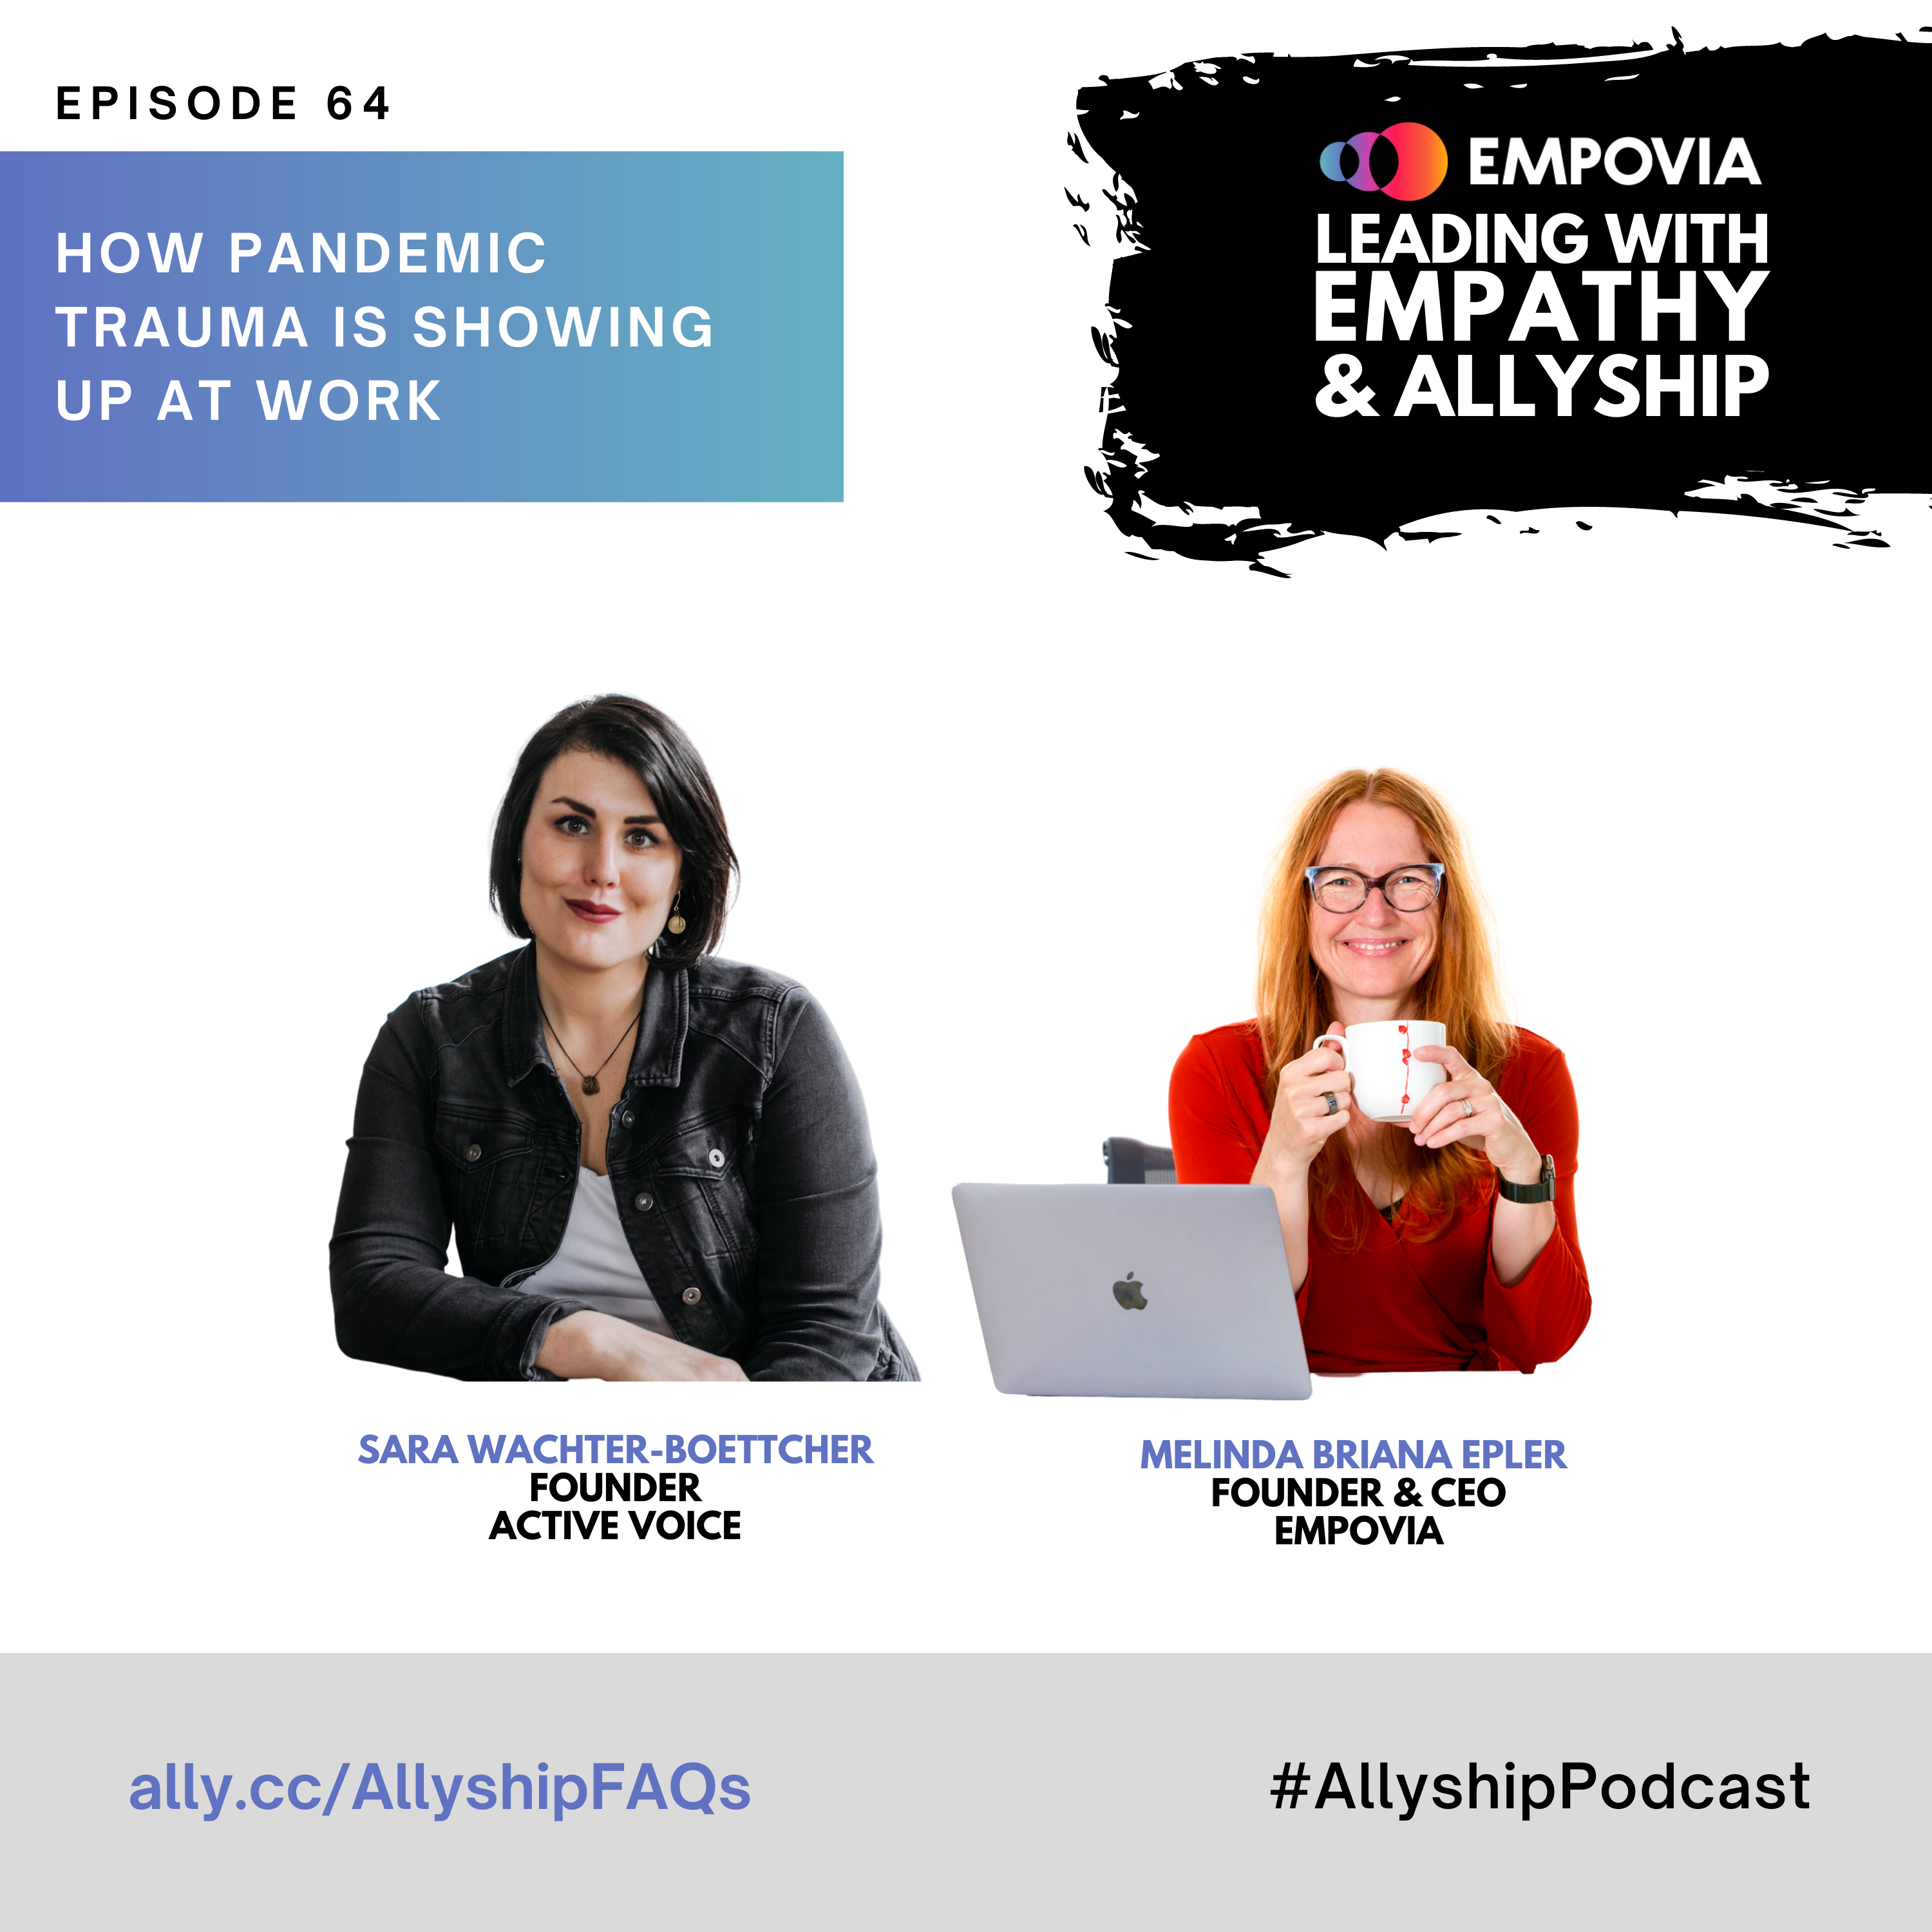 Leading With Empathy & Allyship promo with the Empovia logo and photos of Sara Wachter-Boettcher, a White woman with short black hair who’s wearing a black denim jacket paired with a white top, and host Melinda Briana Epler, a White woman with red hair, glasses, and orange shirt holding a white mug behind a laptop.